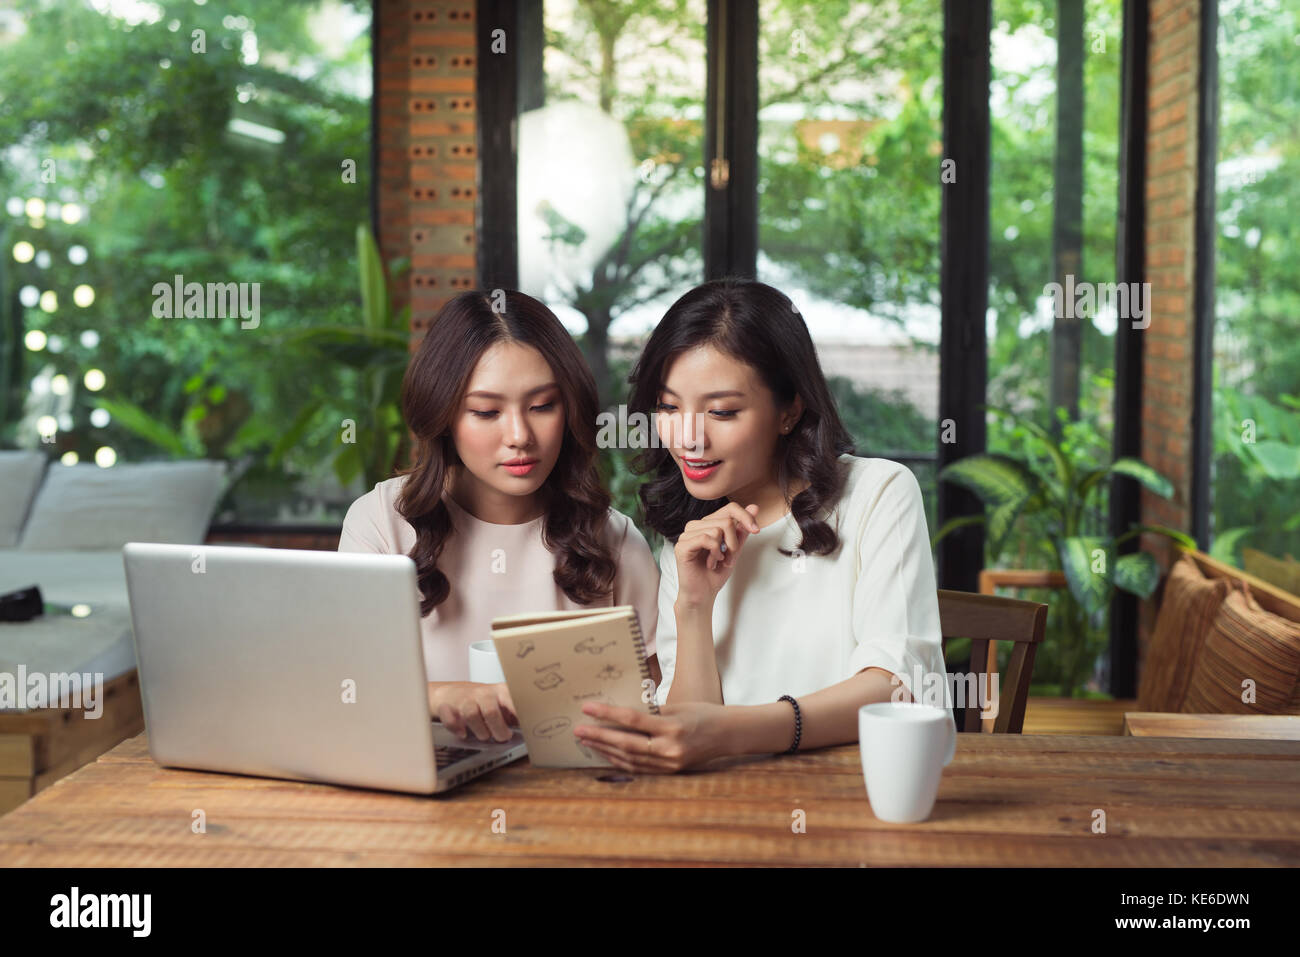 Asian women. Two collegues in an office Stock Photo